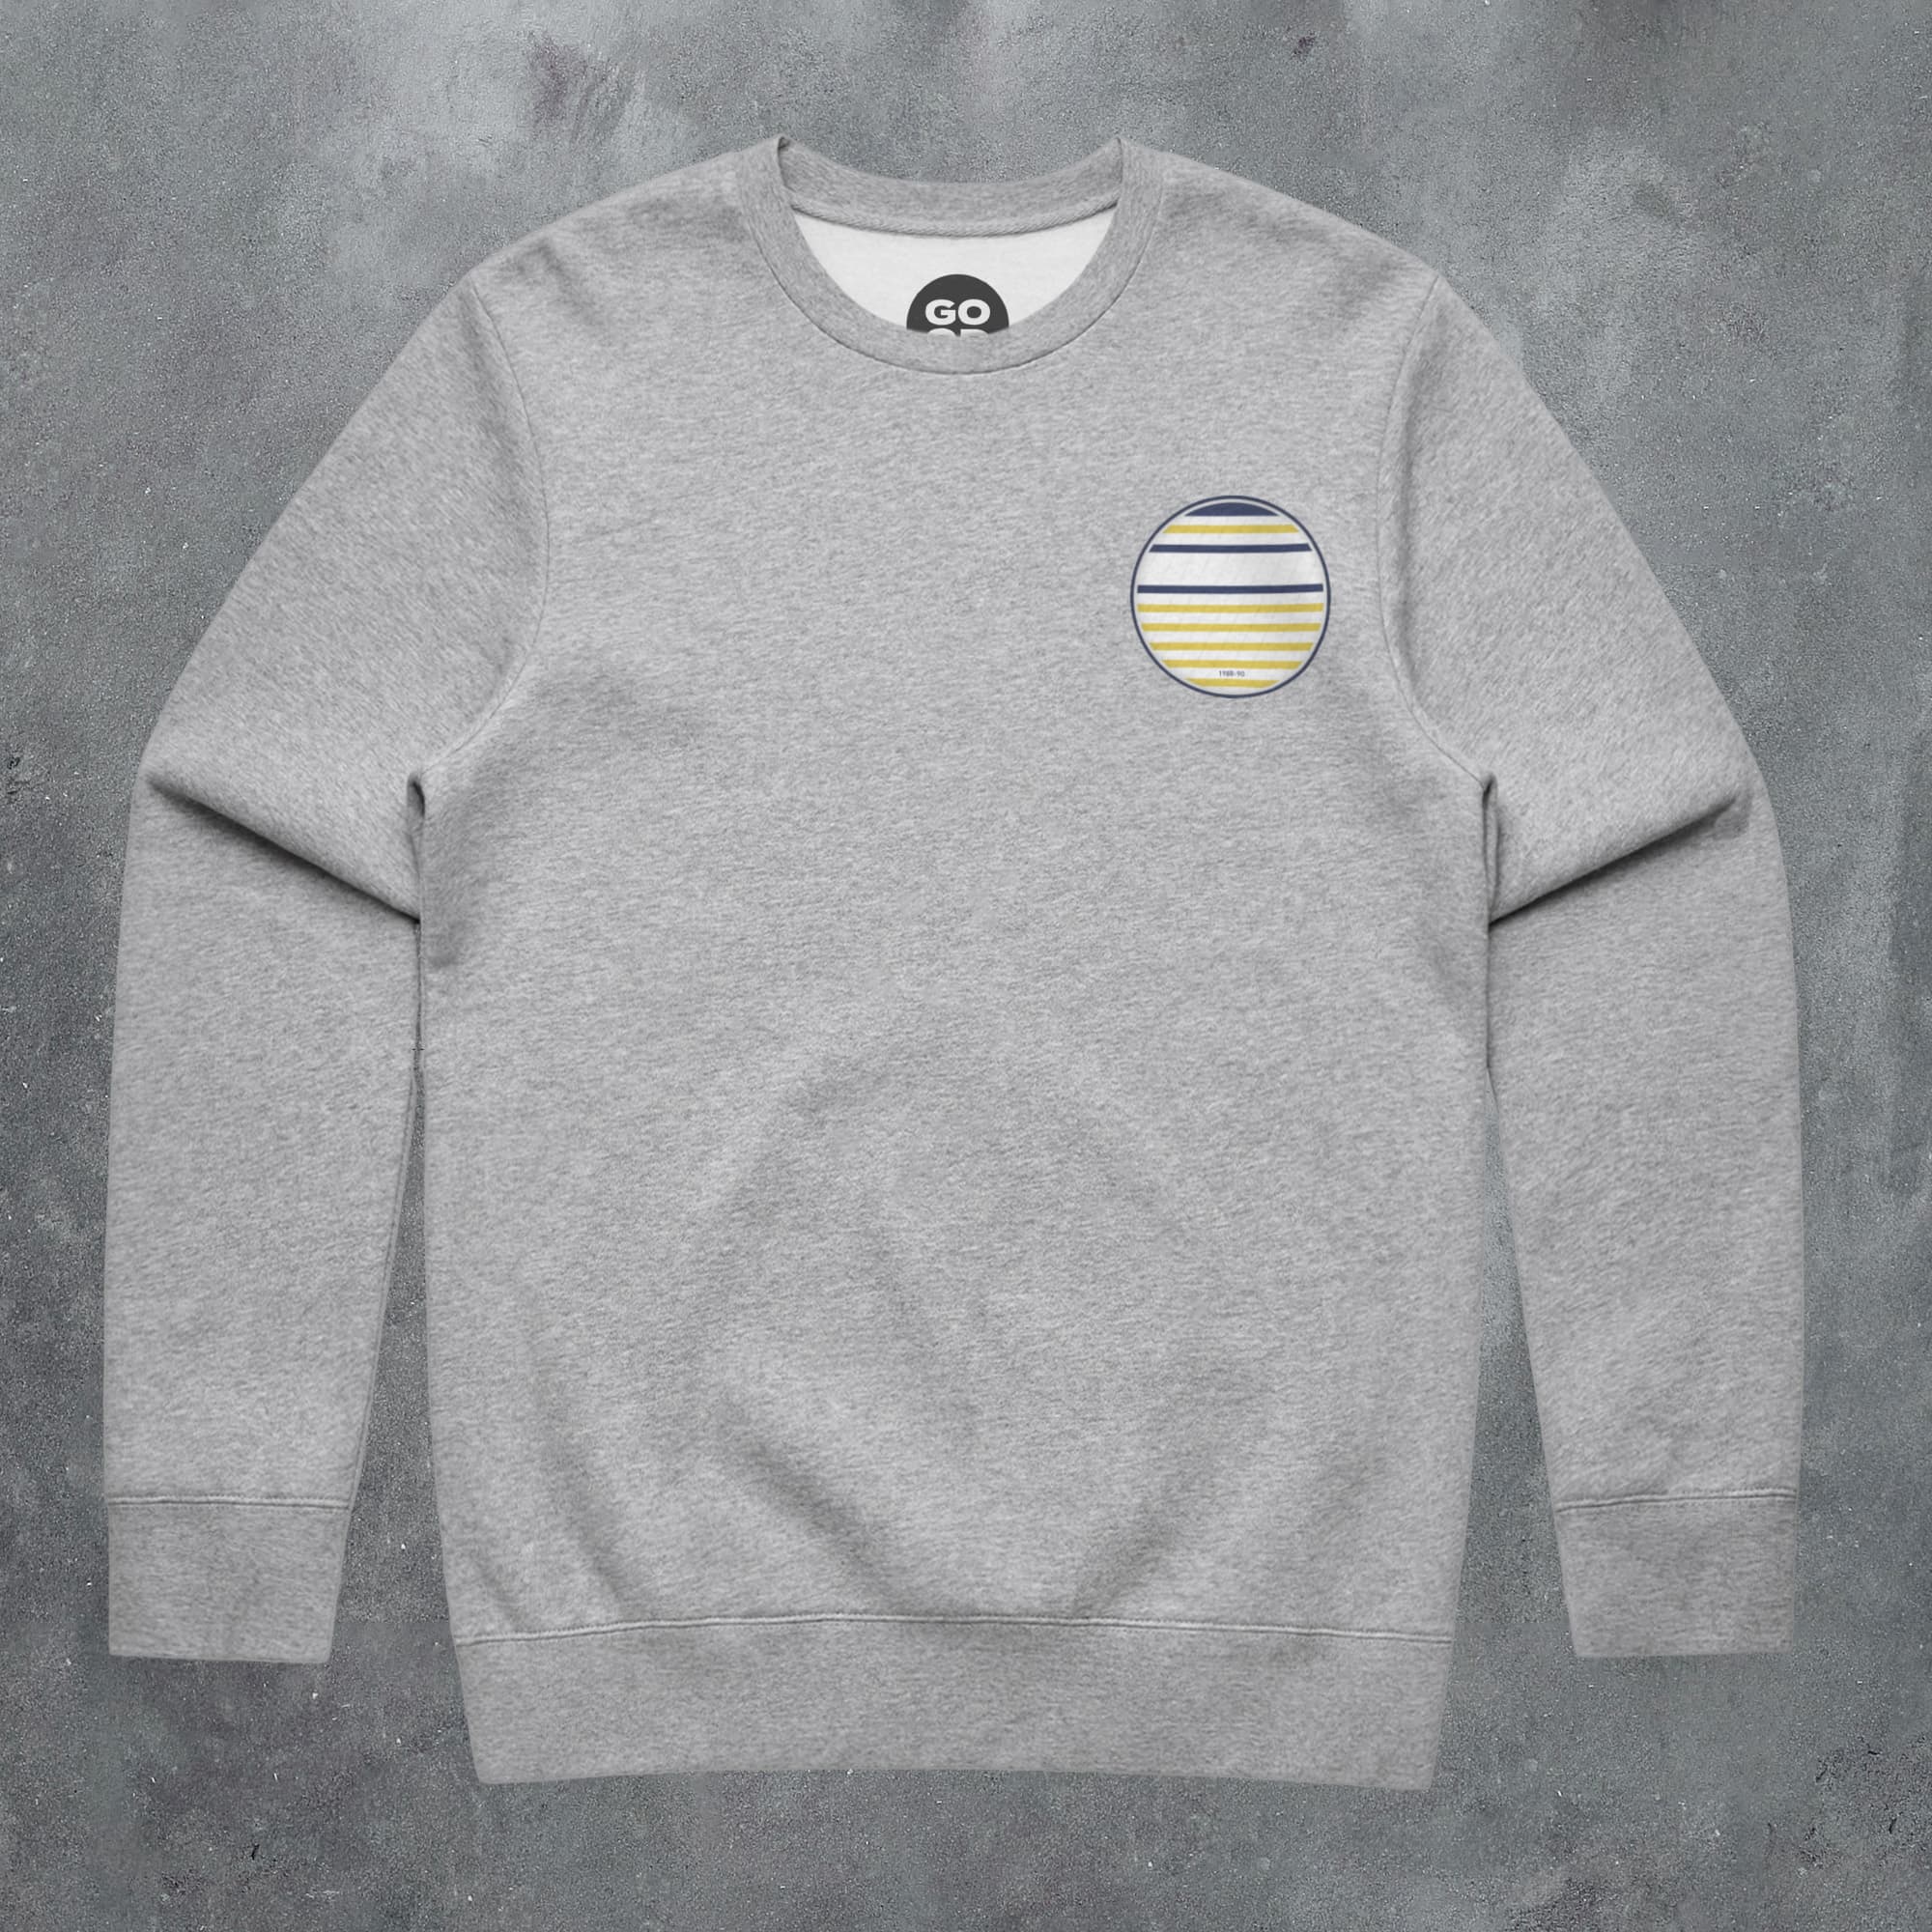 a grey sweatshirt with a striped circle on the chest